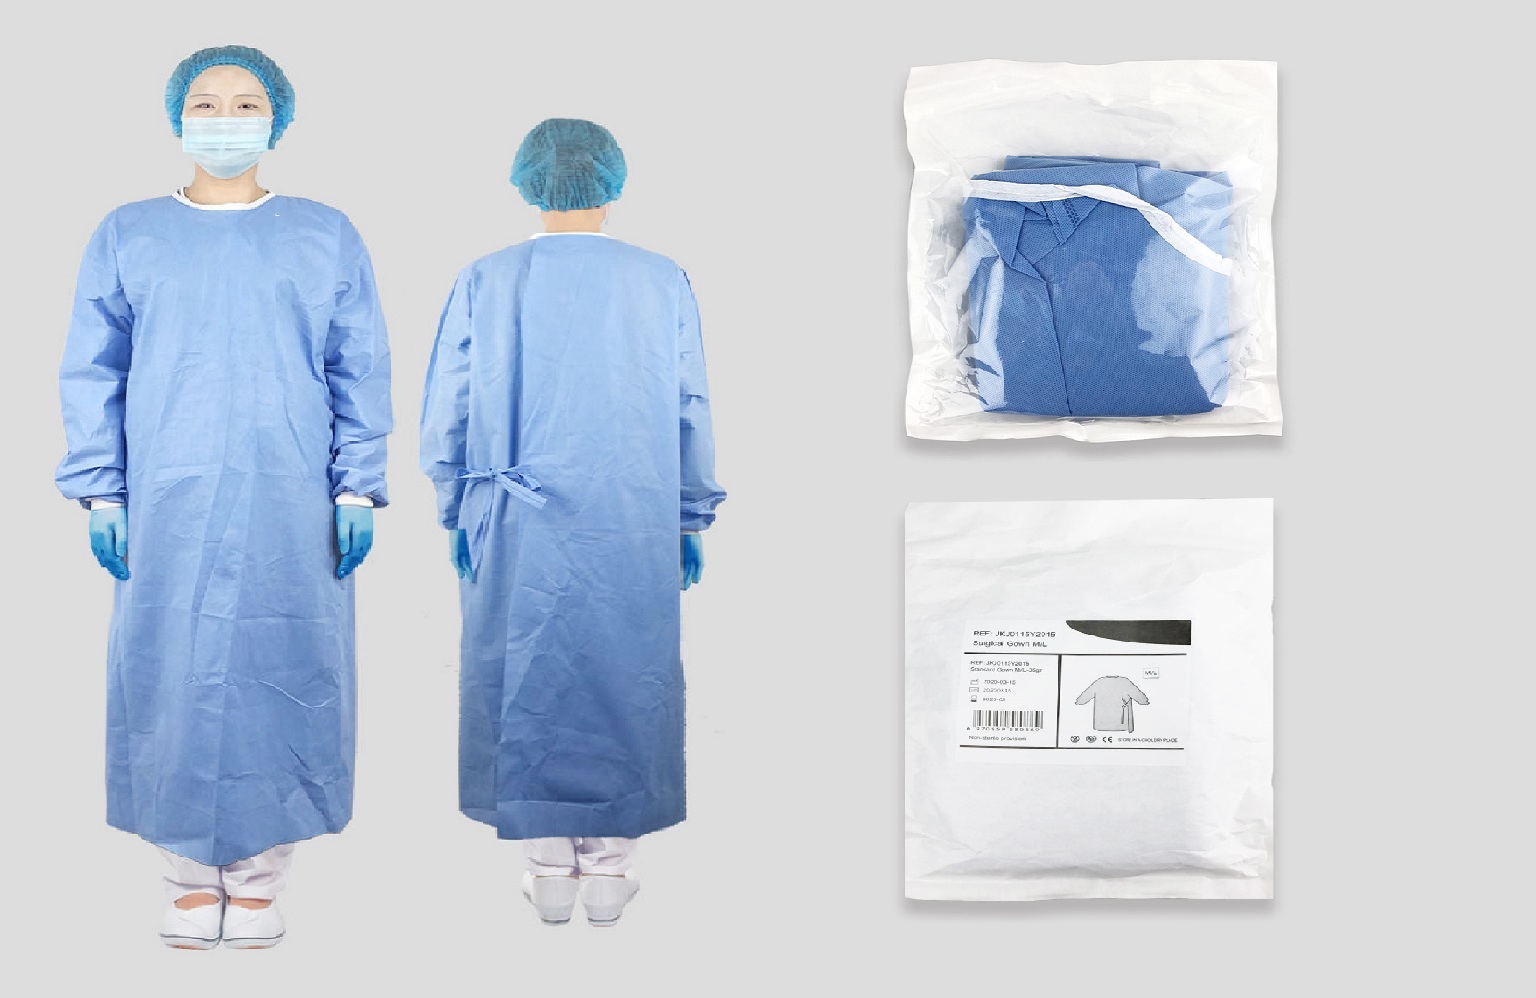 Buy Sterile Standard Surgical Gown Large in Qatar Orders delivered quickly  - Wellcare Pharmacy